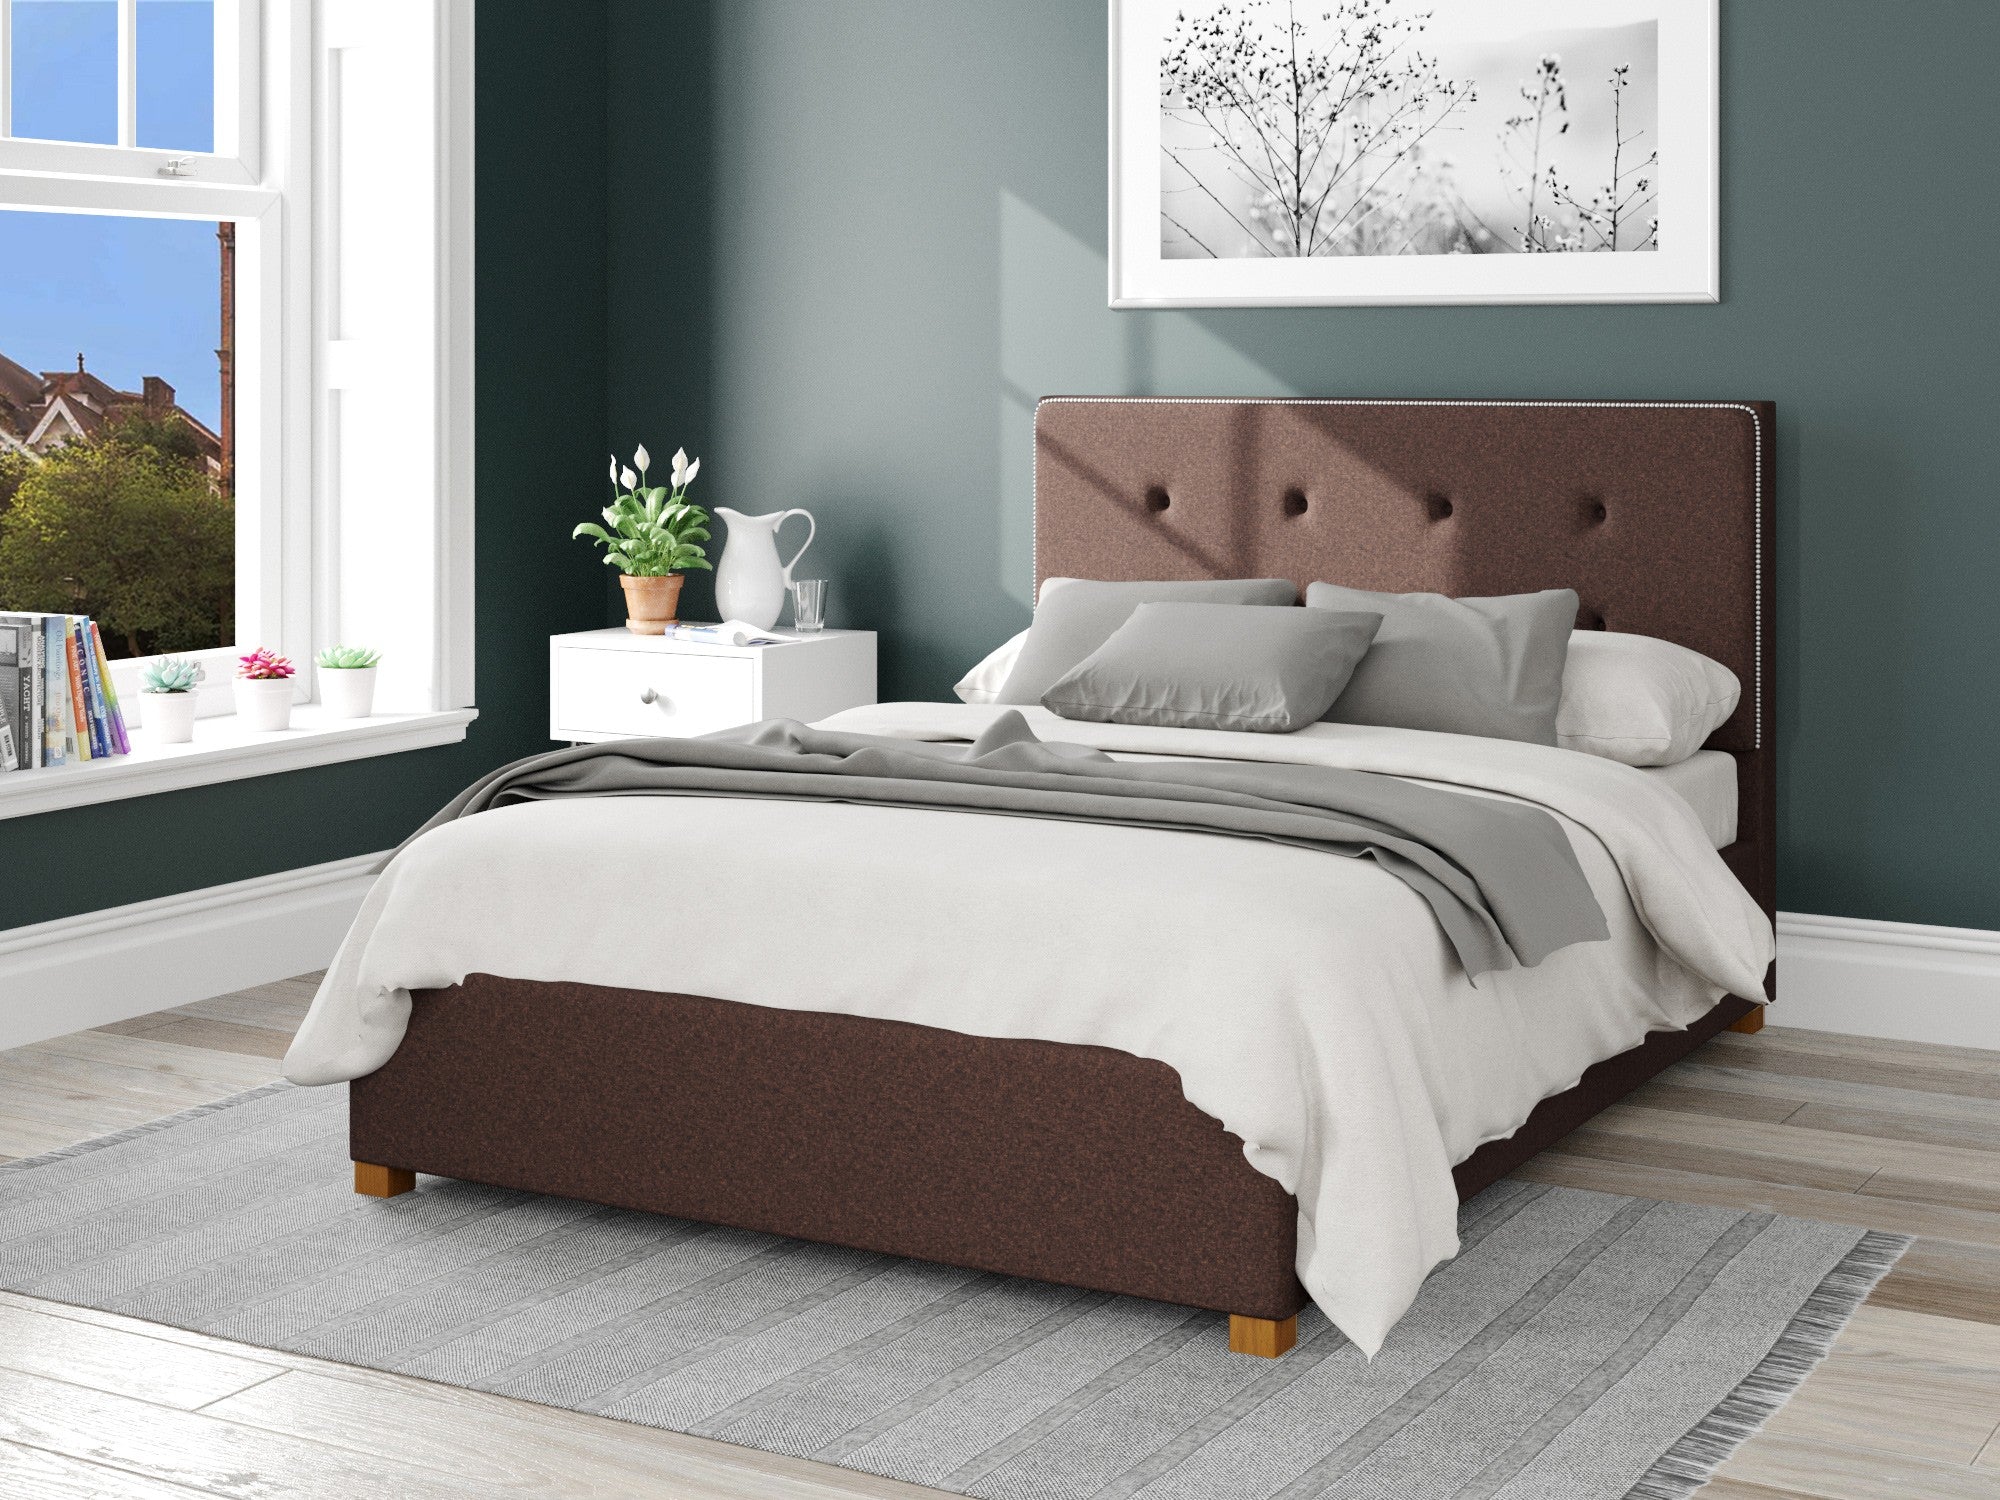 Presley Fabric Ottoman Bed - Yorkshire Knit - Chocolate